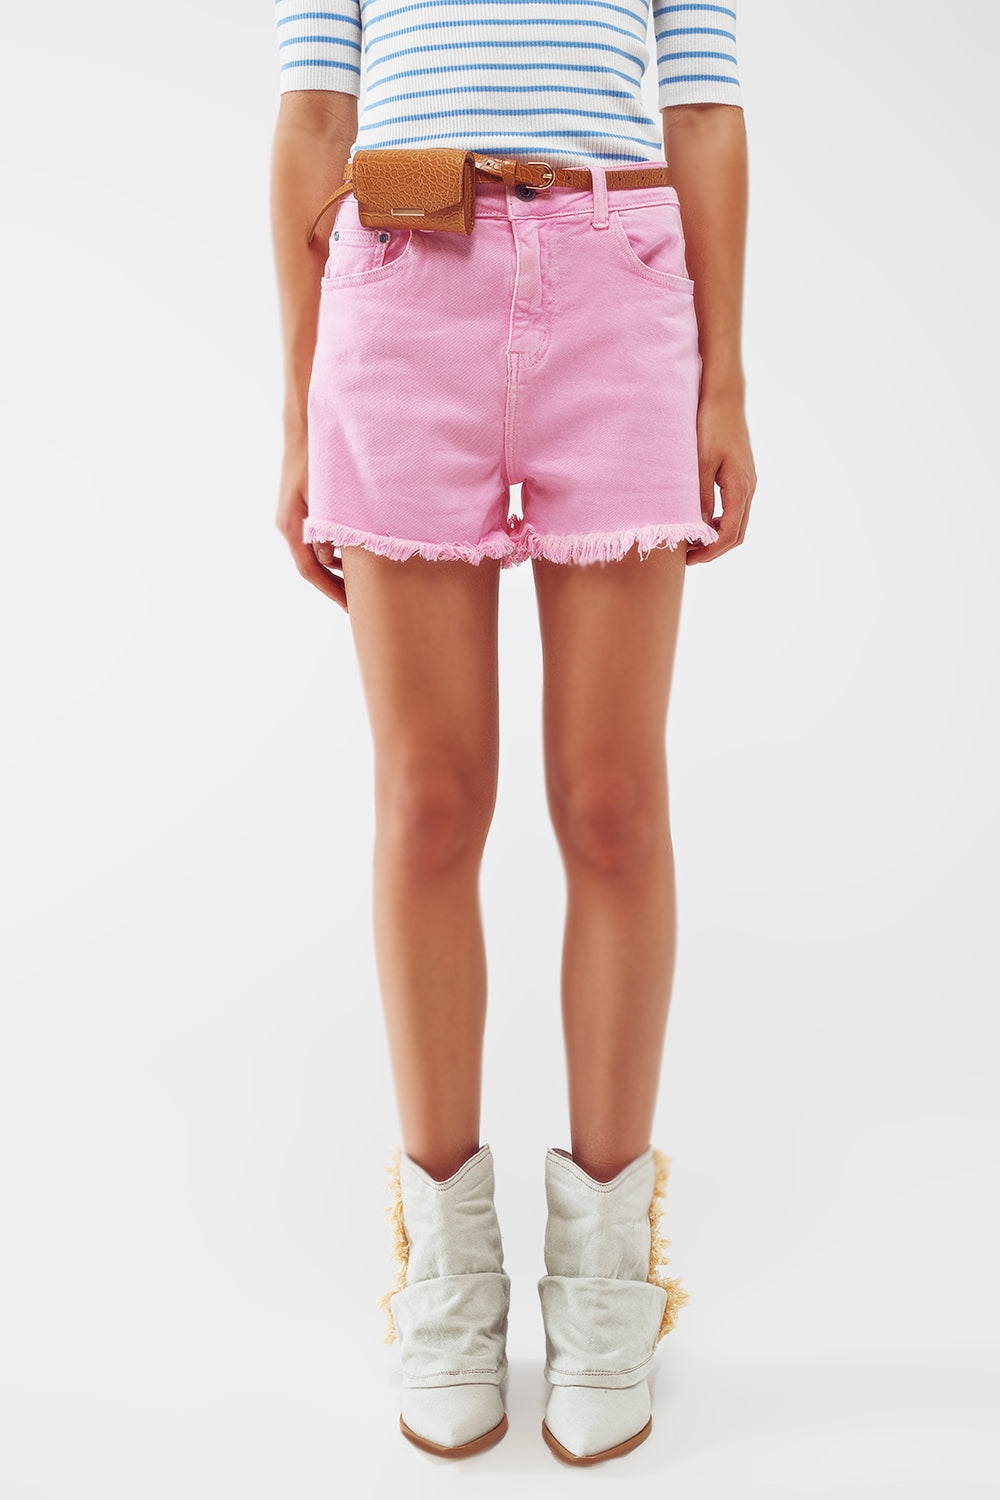 Q2 Shorts in pink